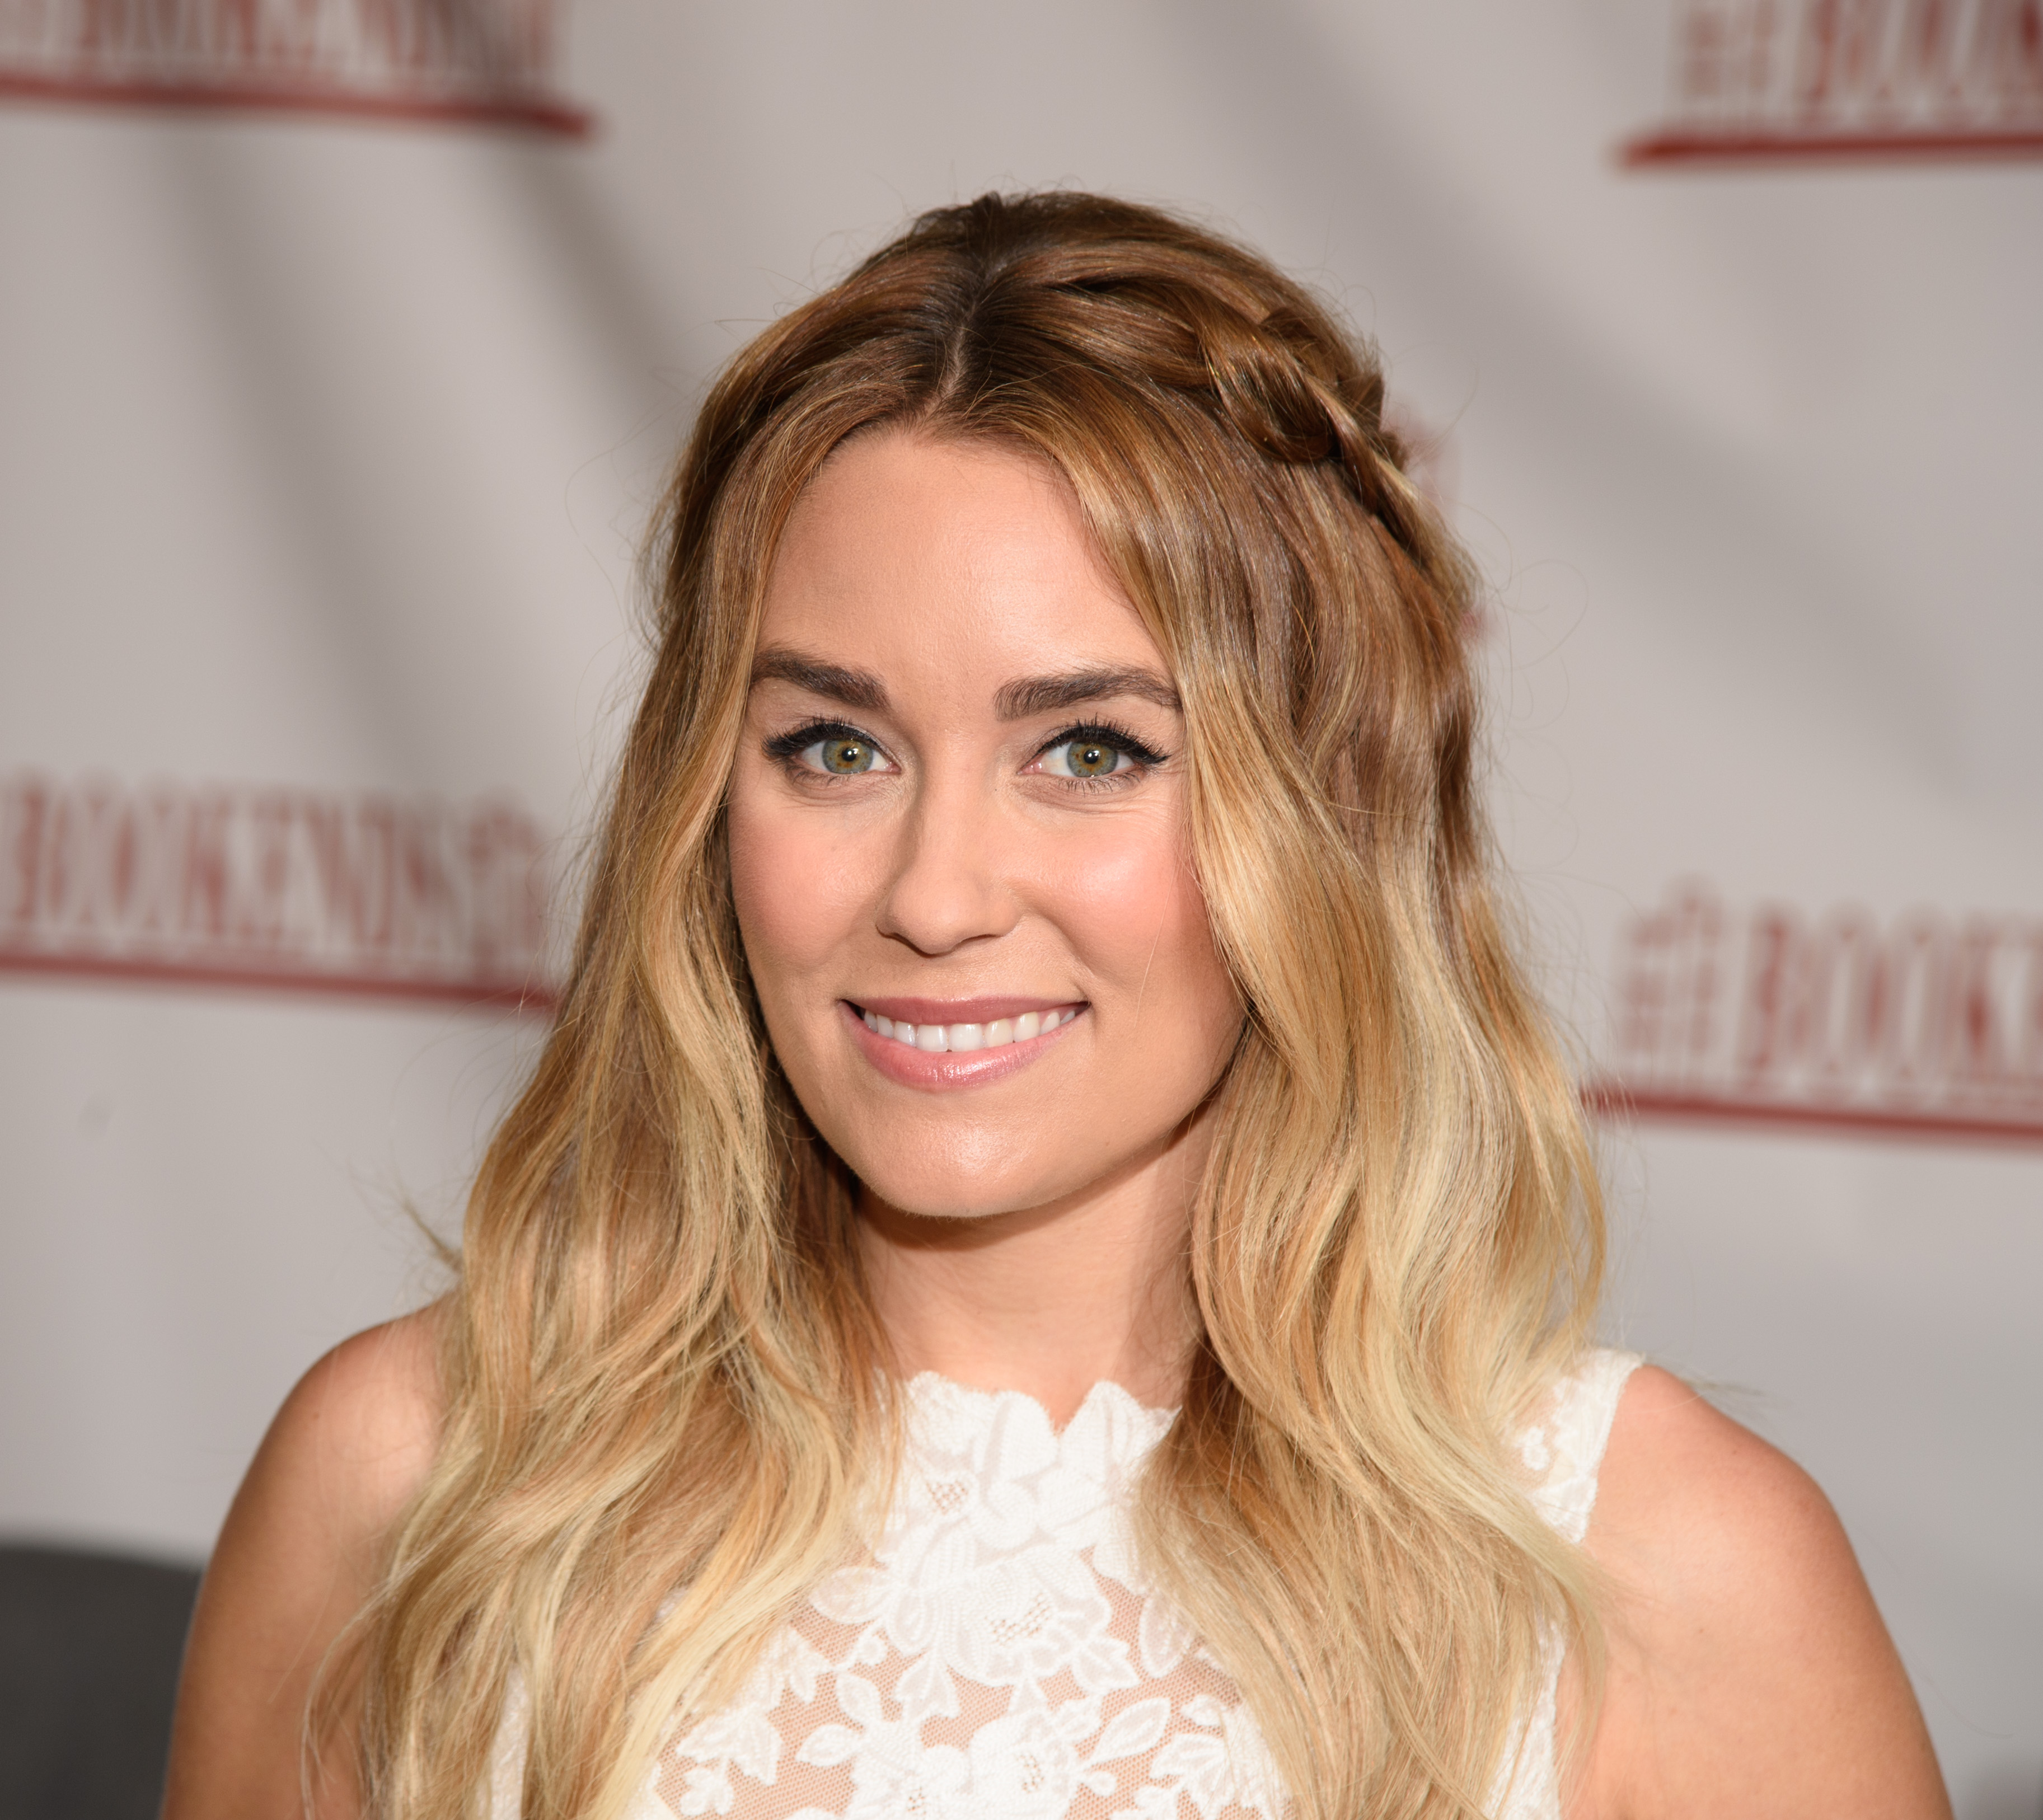 Lauren Conrad Signs Copies Of Her New Book "Lauren Conrad Celebrate" at Bookends Bookstore on March 29, 2016 in Ridgewood, New Jersey. (Dave Kotinsky—Getty Images)